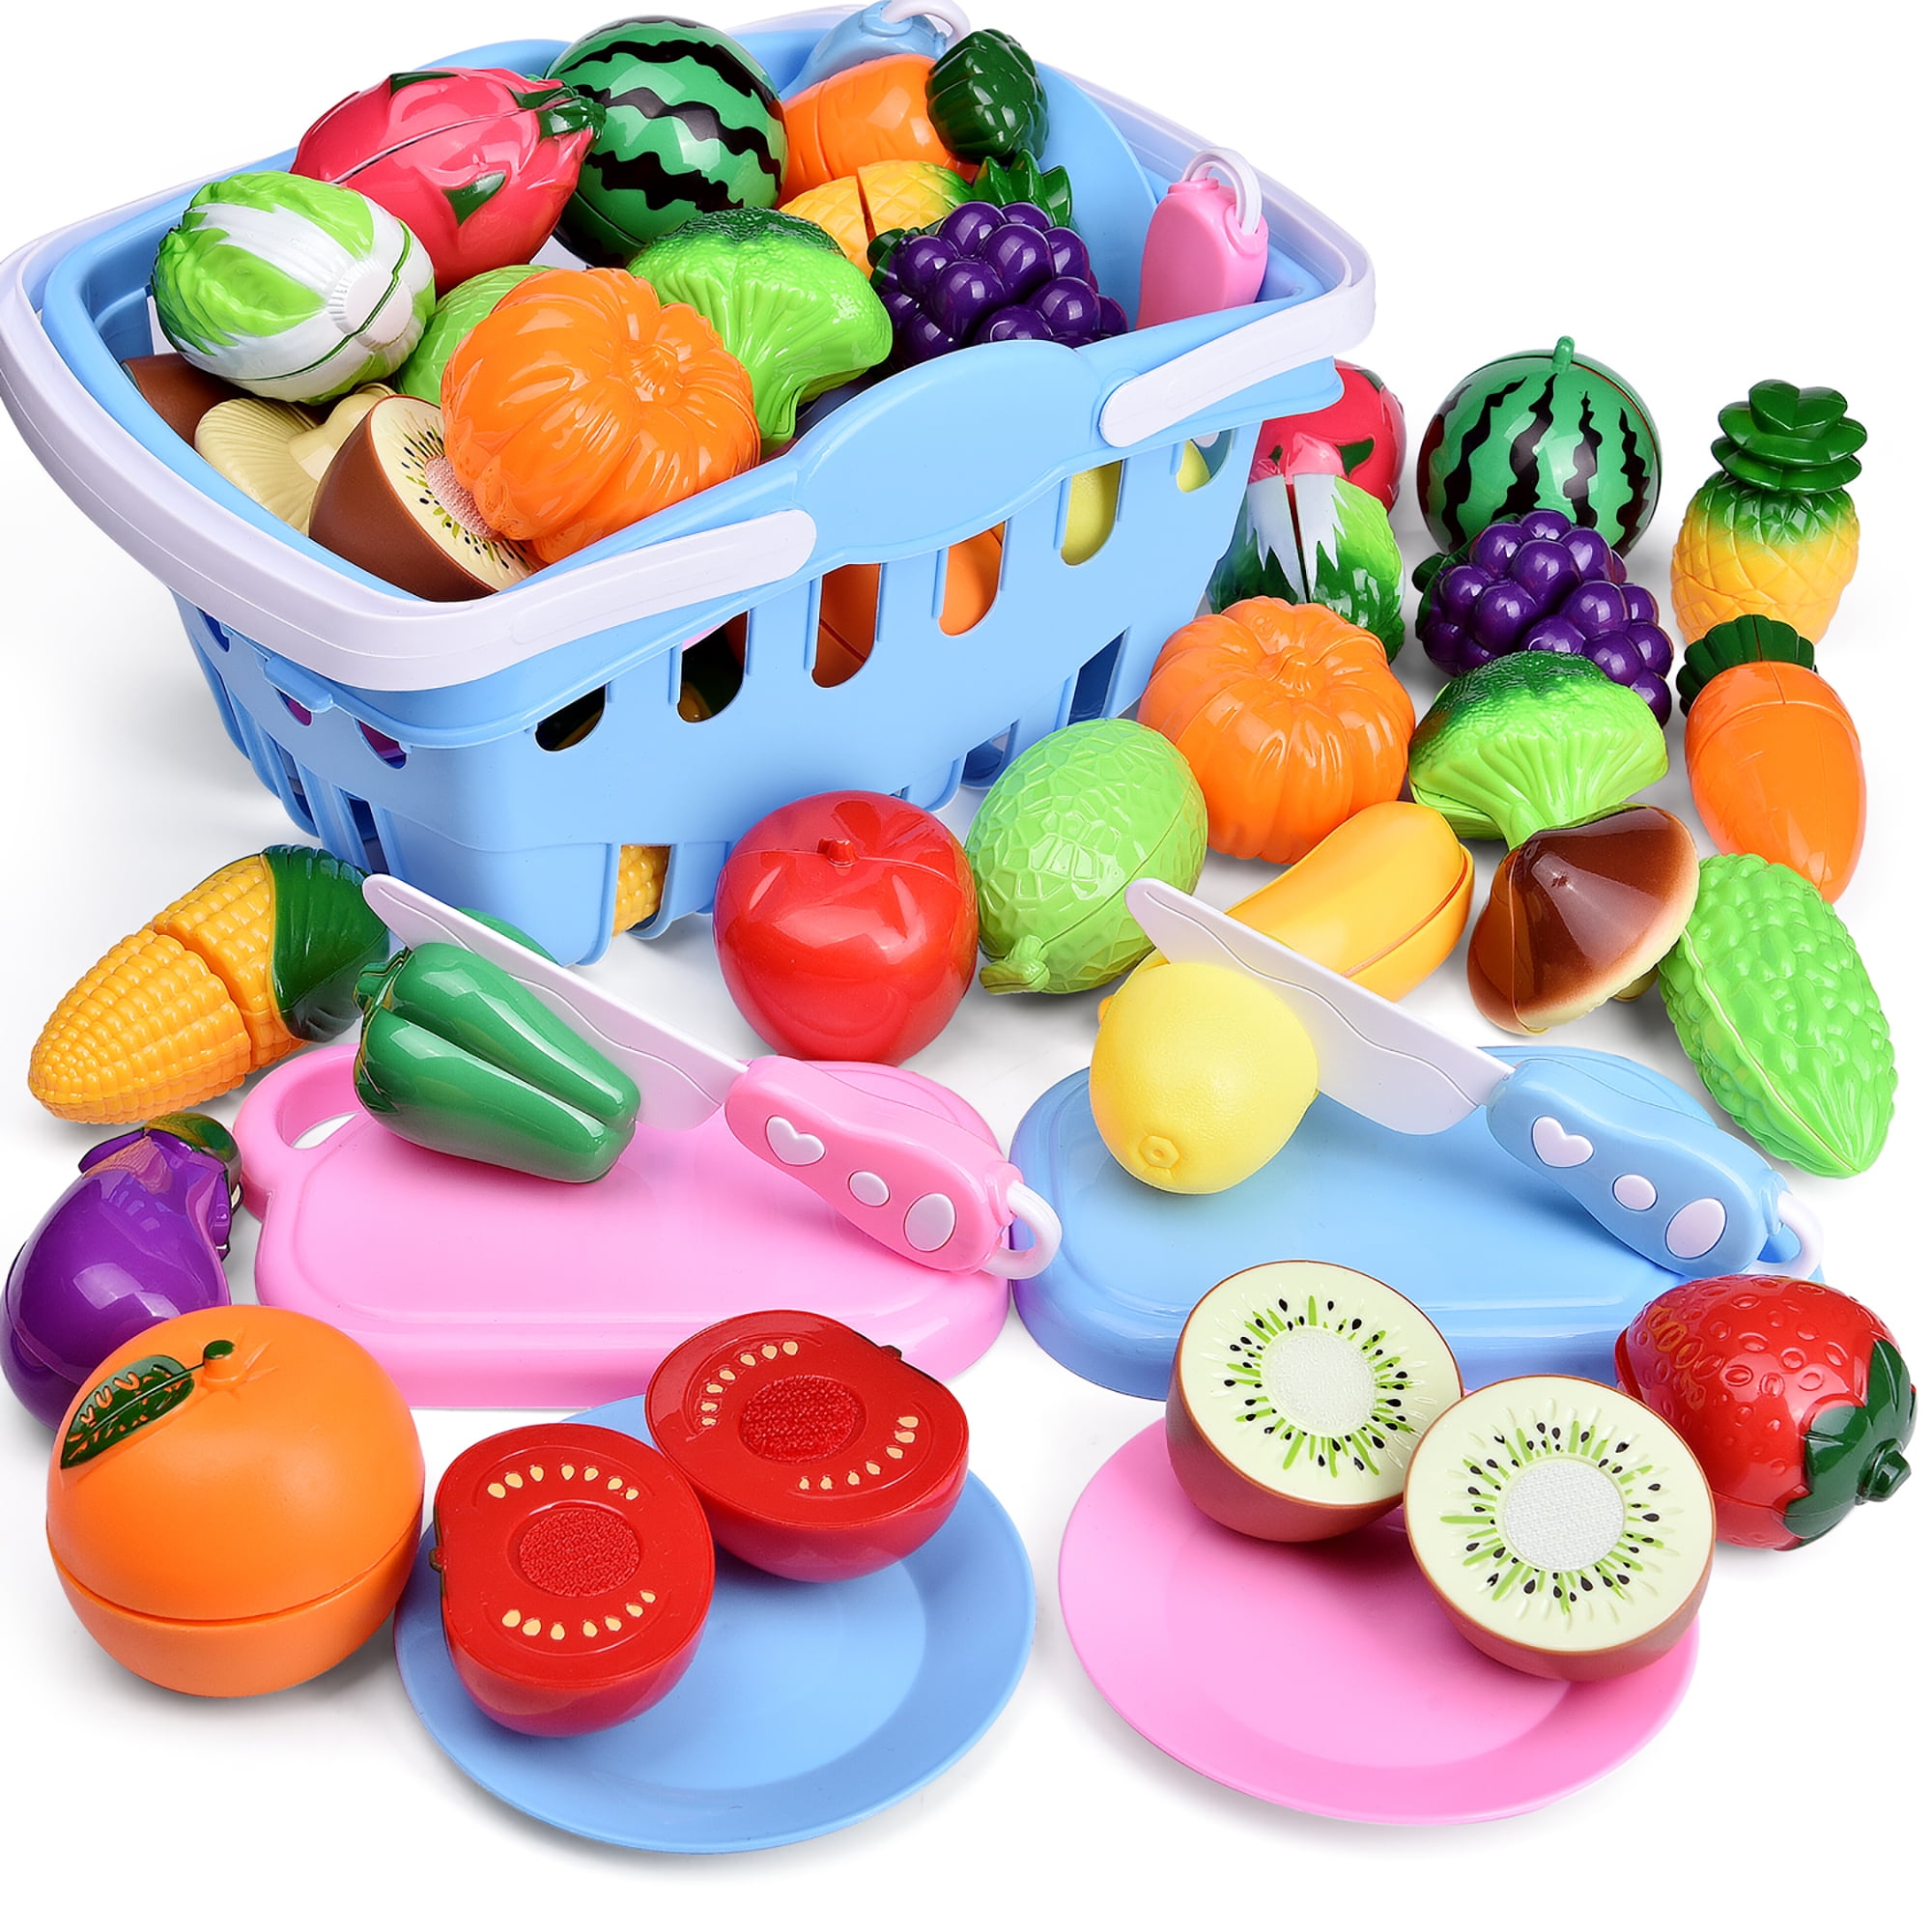 Colorful Kids Child Pretend Role Play Kitchen Fruit Vegetable Toy Cutting Set Z 